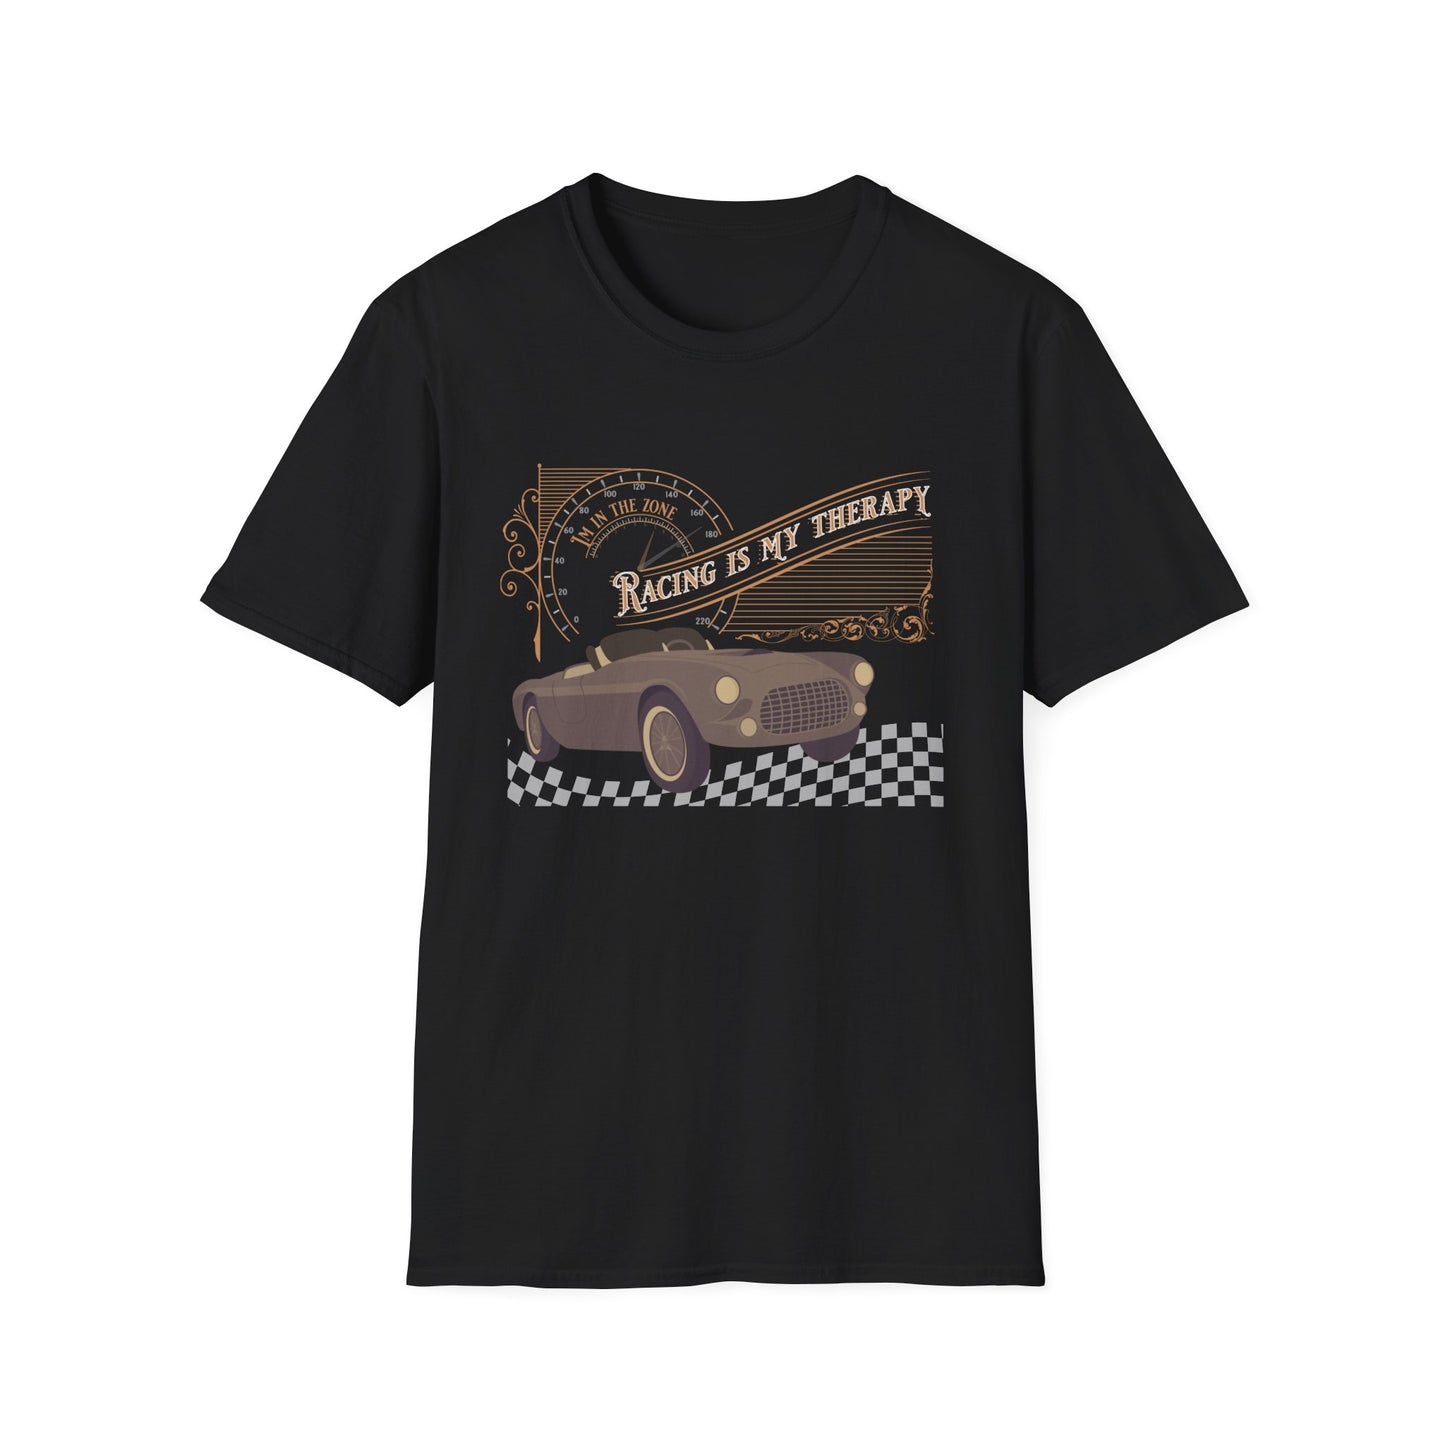 Unisex Softstyle T-Shirt - Racing is my therapy